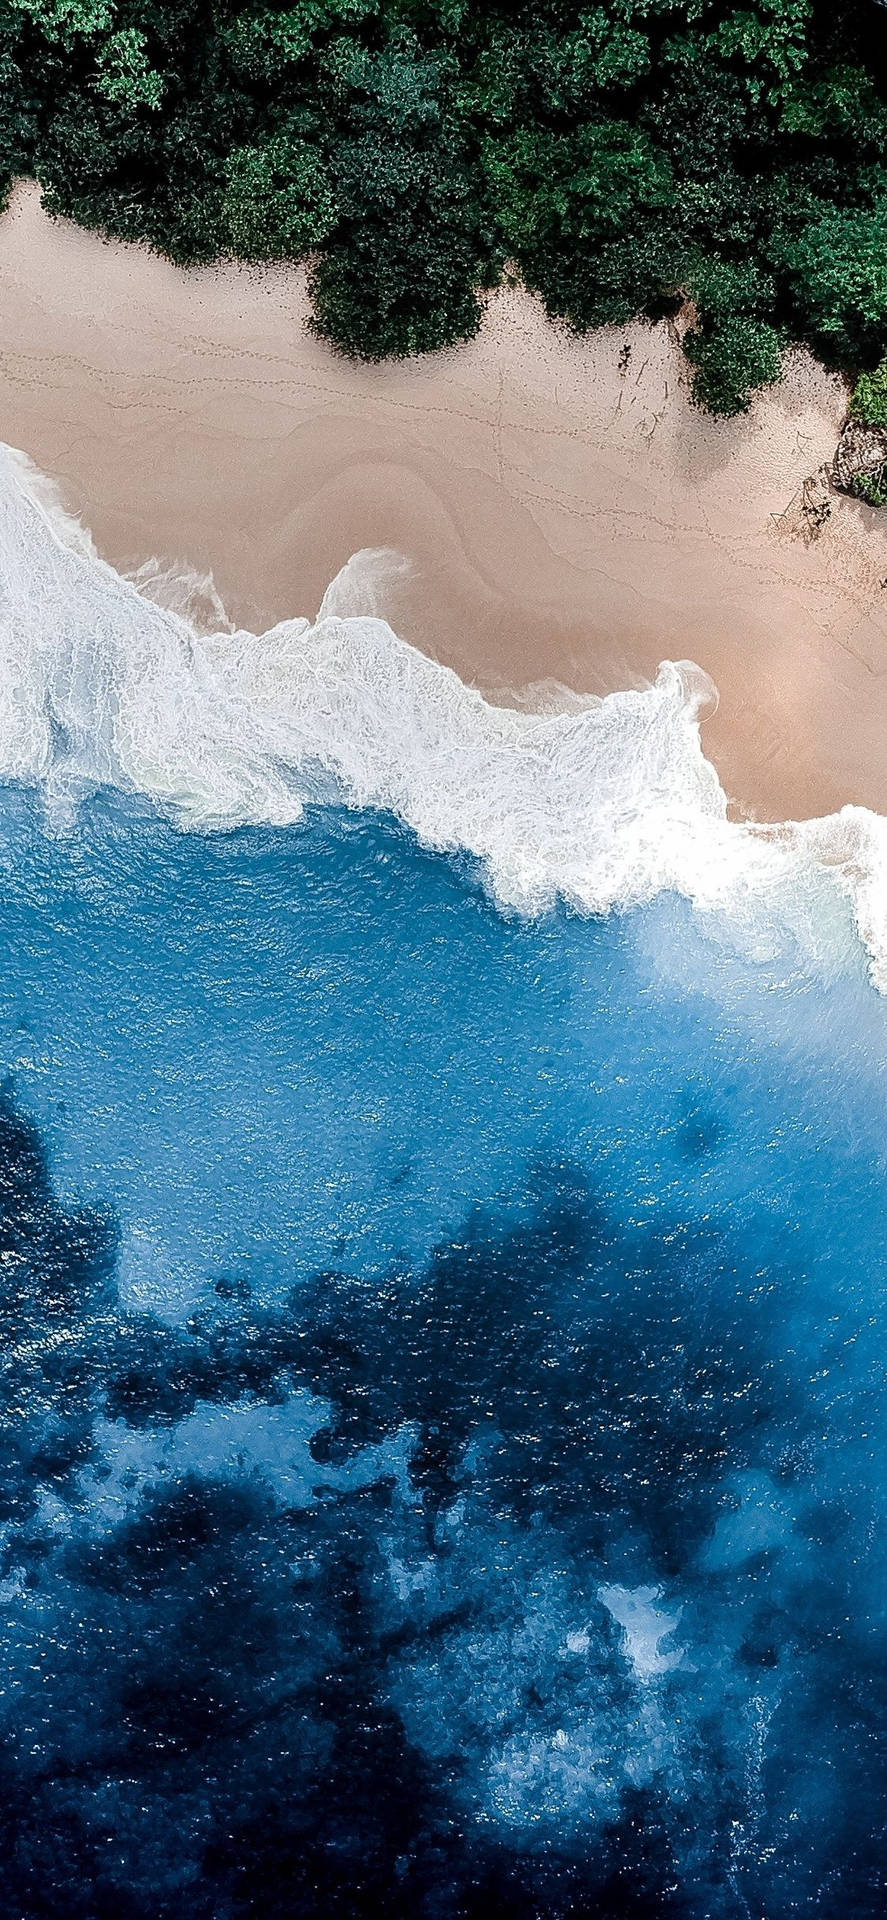 Wallpaper ID 868230  waves day sea flowing water no People motion  textured pattern nature design blue beauty in nature Apple Inc  abstract outdoors closeup free download